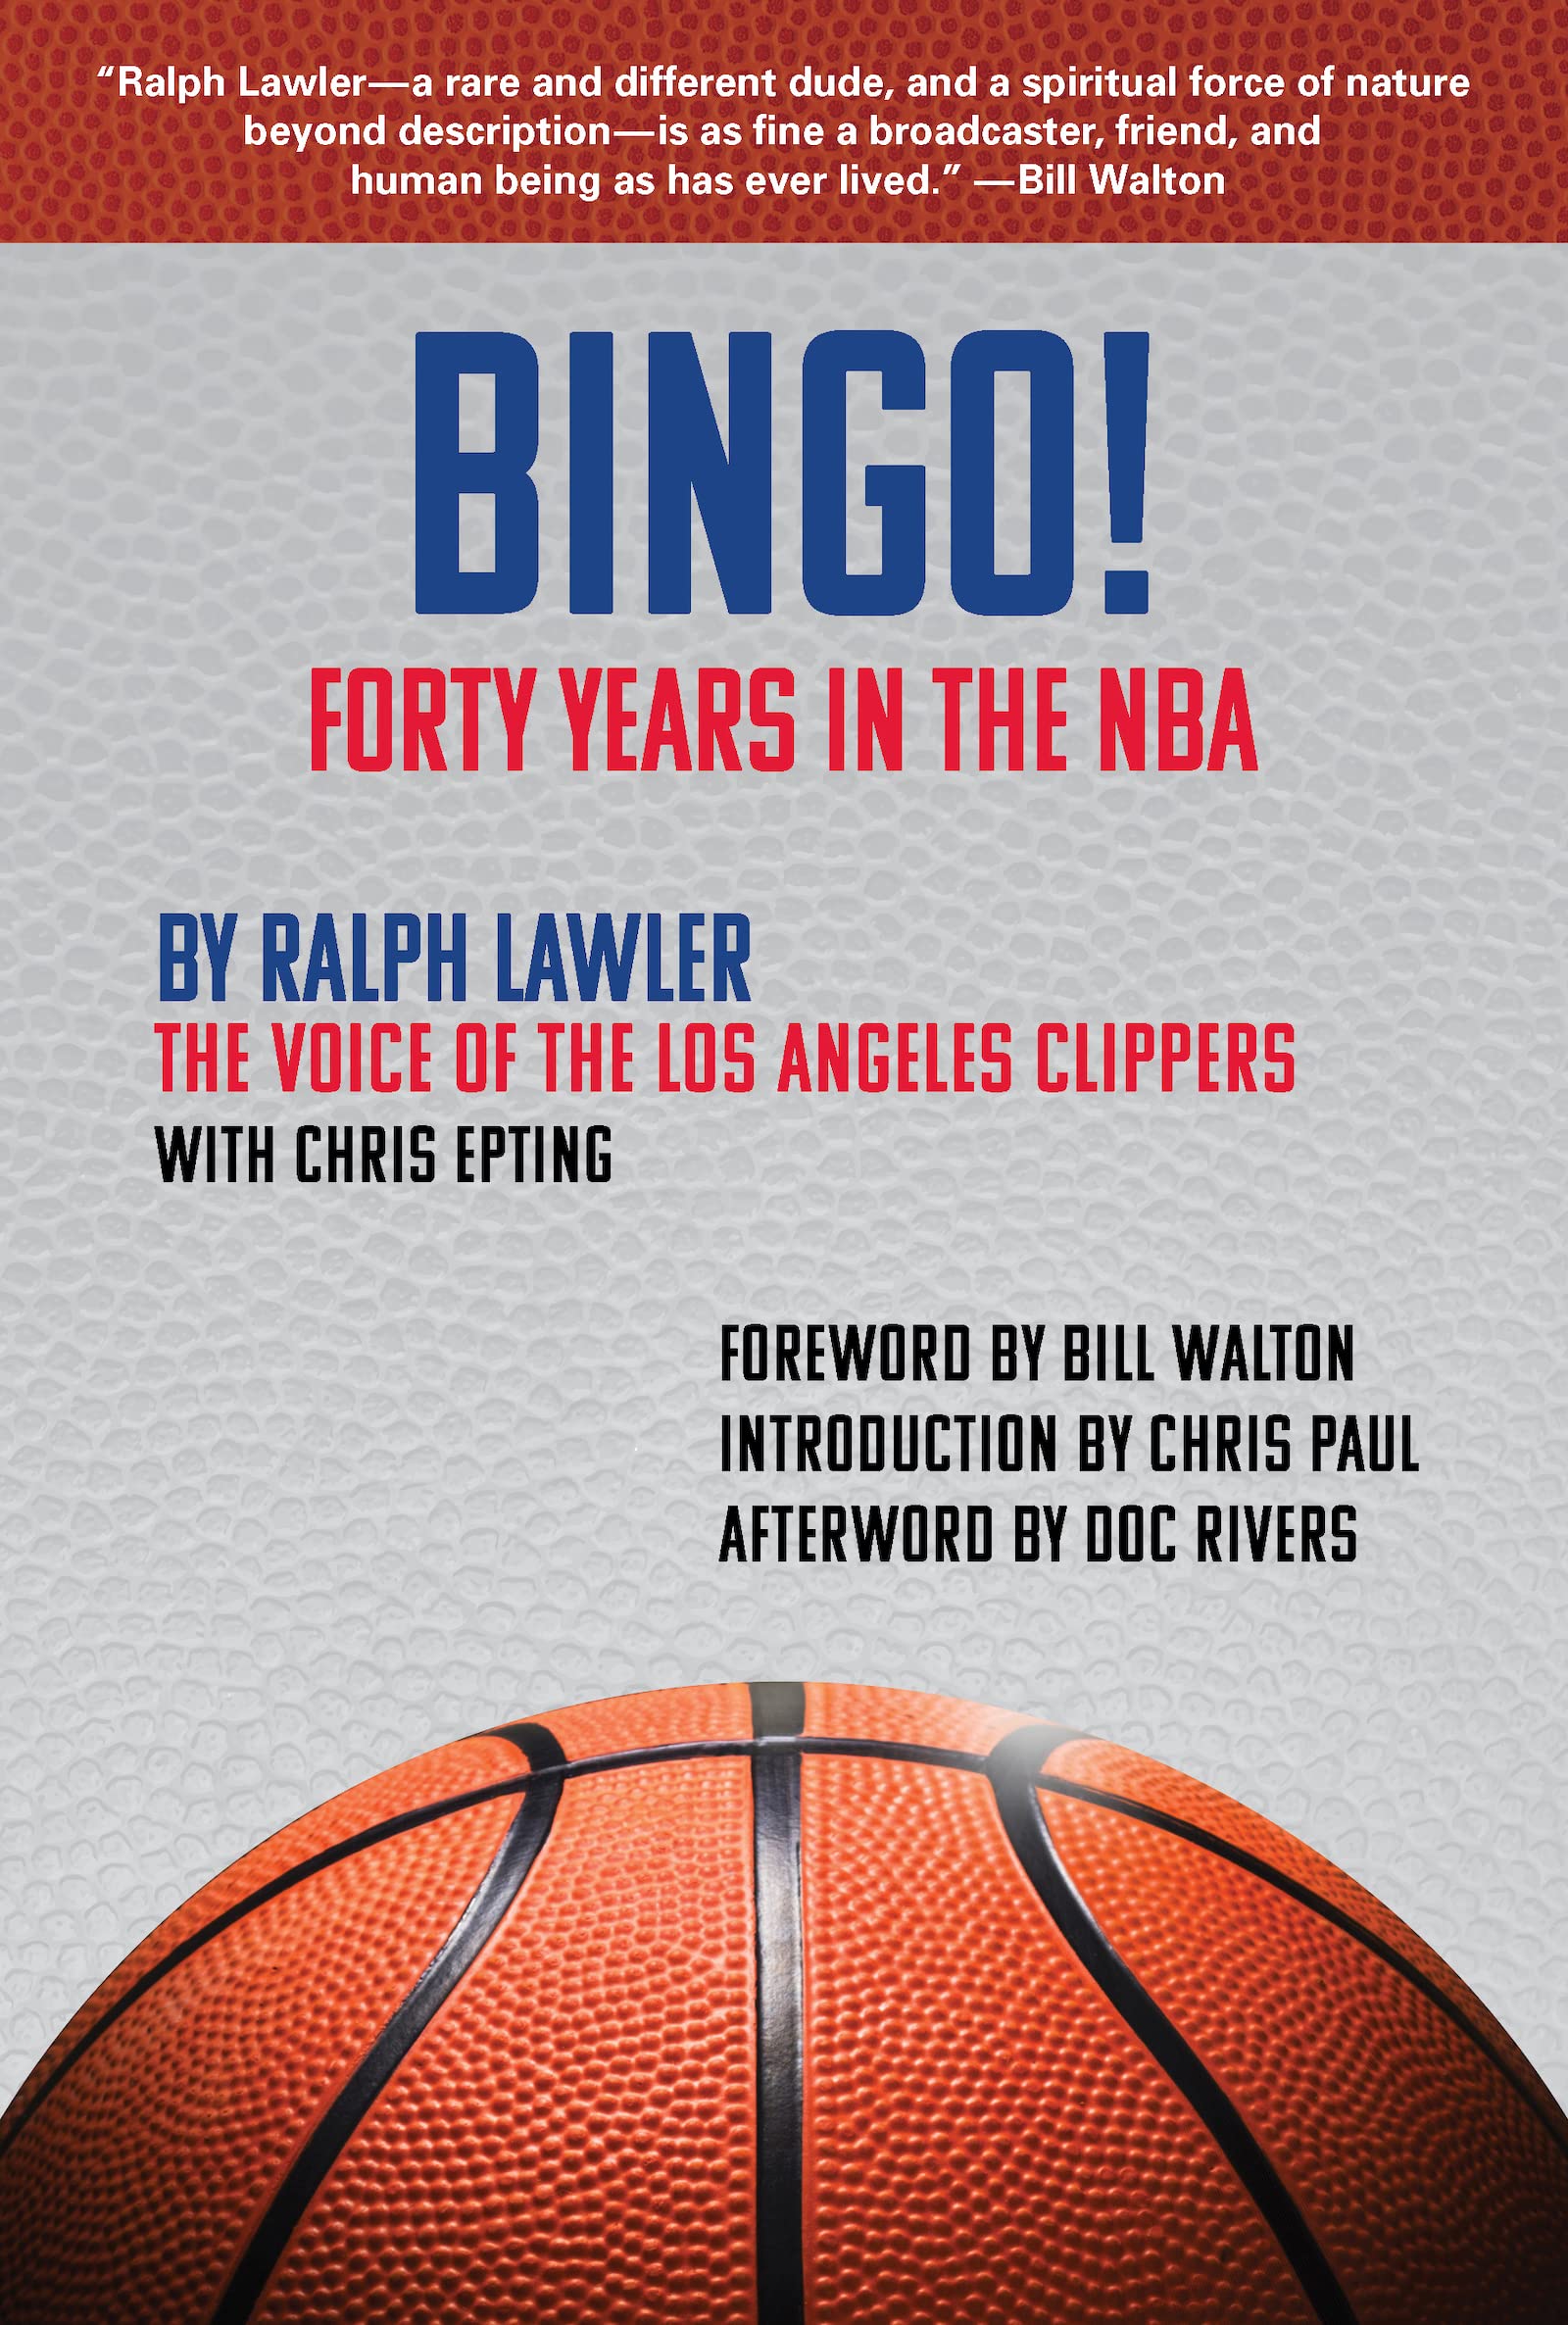 Ralph Lawler ’60. This memoir covers the legendary Los Angeles Clippers and sports broadcaster’s extraordinary life and career.